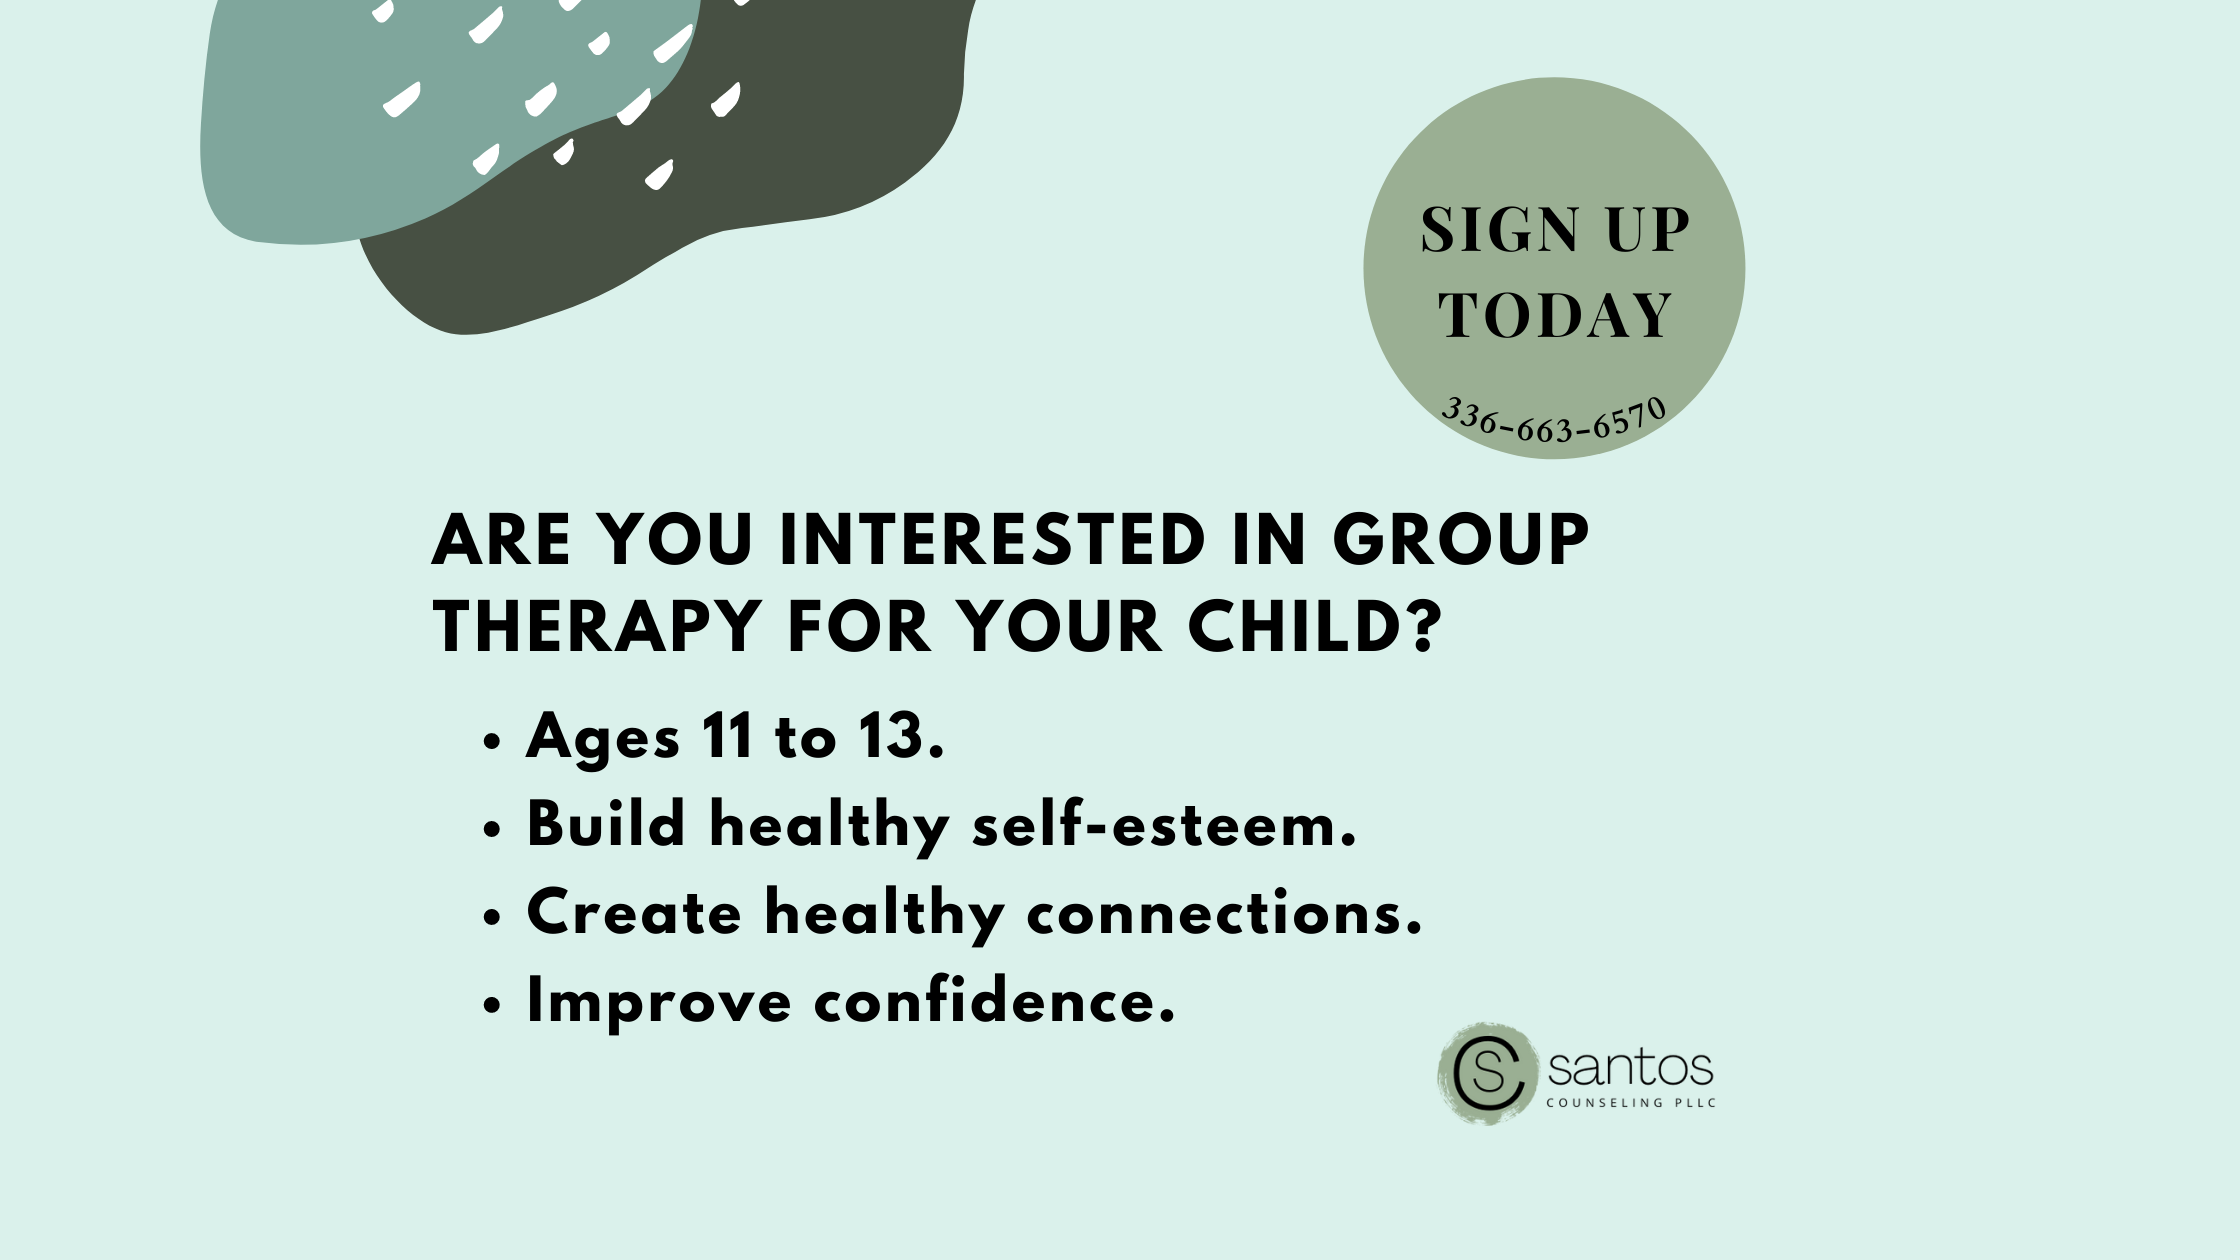 Group Therapy For Kids In Greensboro, North Carolina Helping With Self-Esteem, Self-Confidence, And Building Healthy Coping Skills.